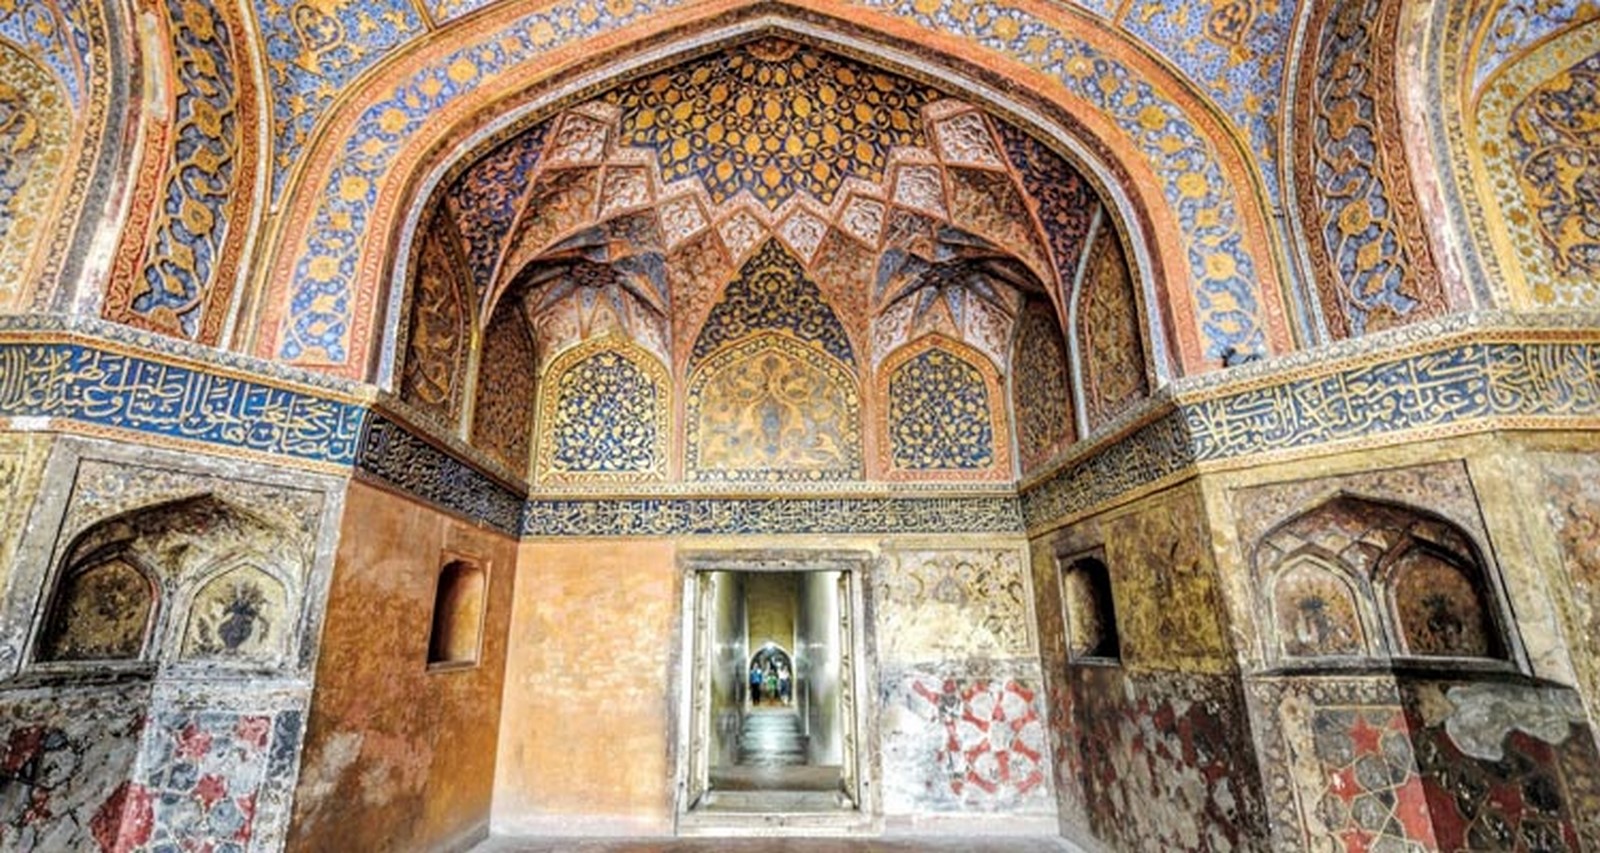 Decorated walls of the tomb _©agra.tourismindia.co.in